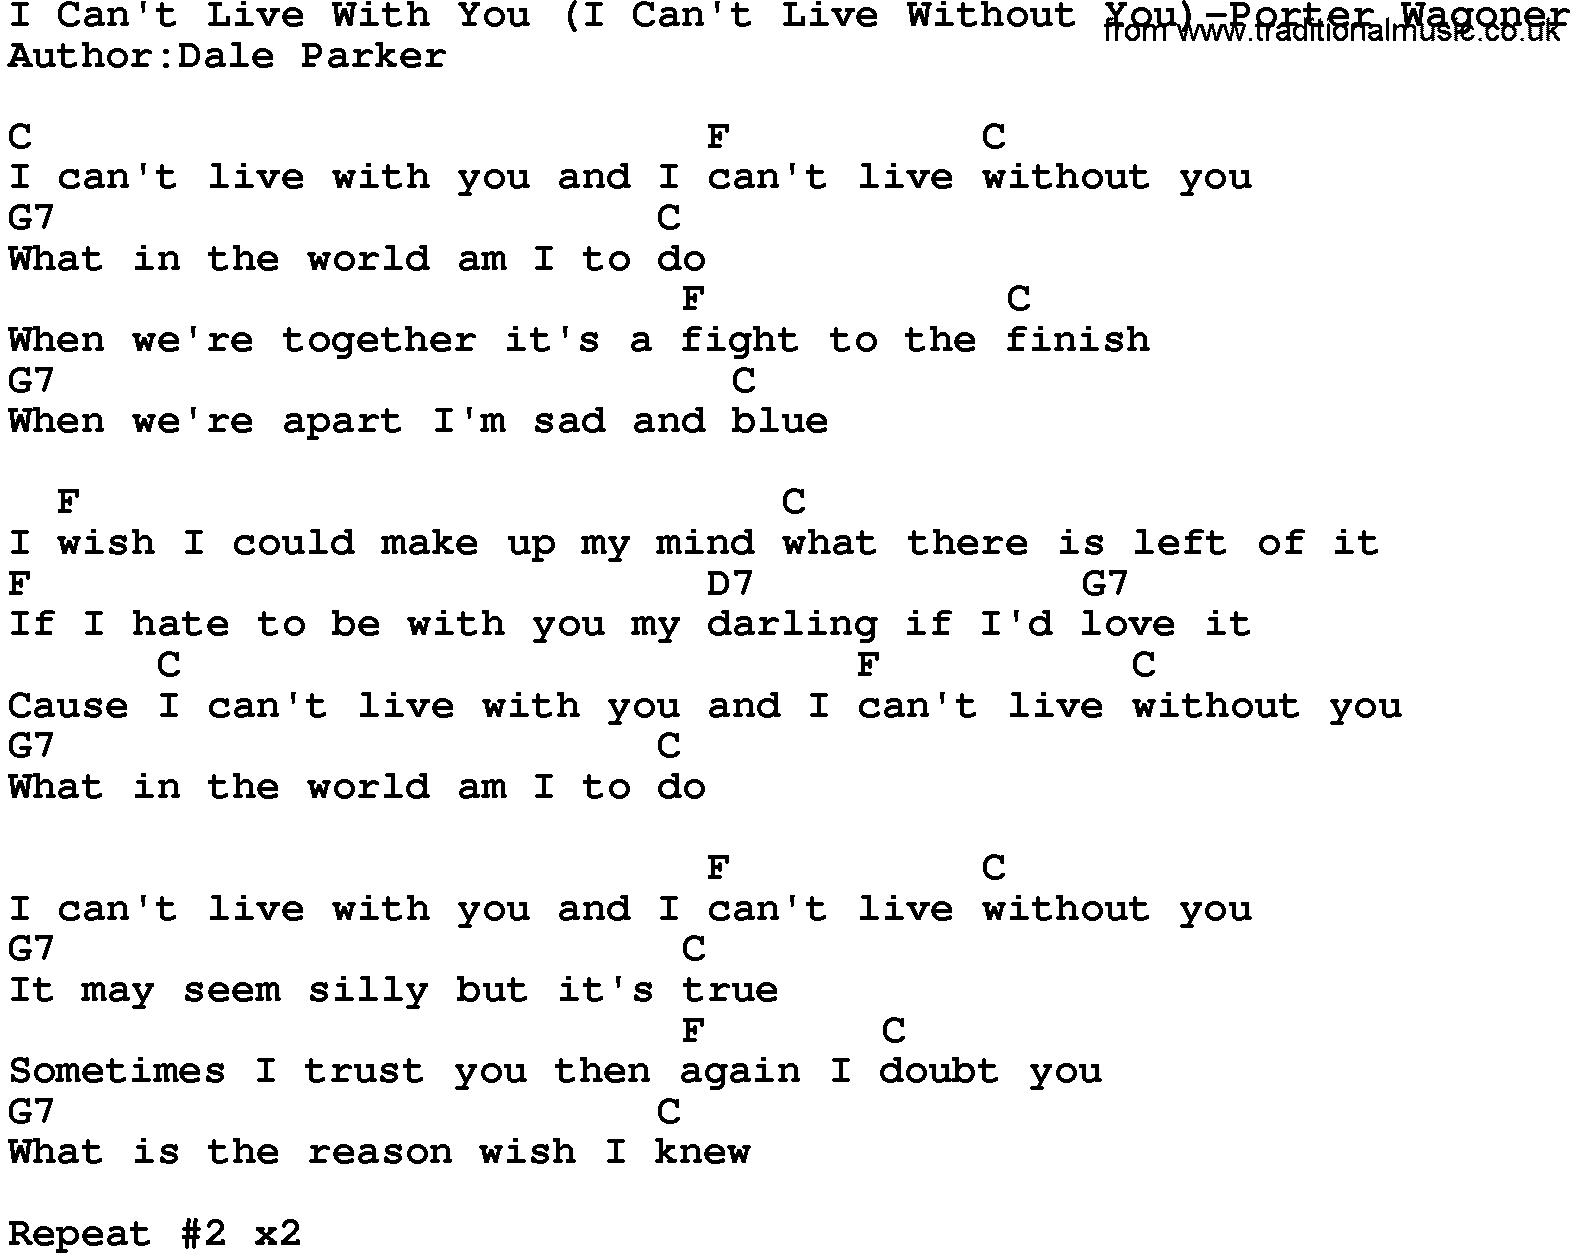 Country music song: I Can't Live With You(I Can't Live Without You)-Porter Wagoner lyrics and chords